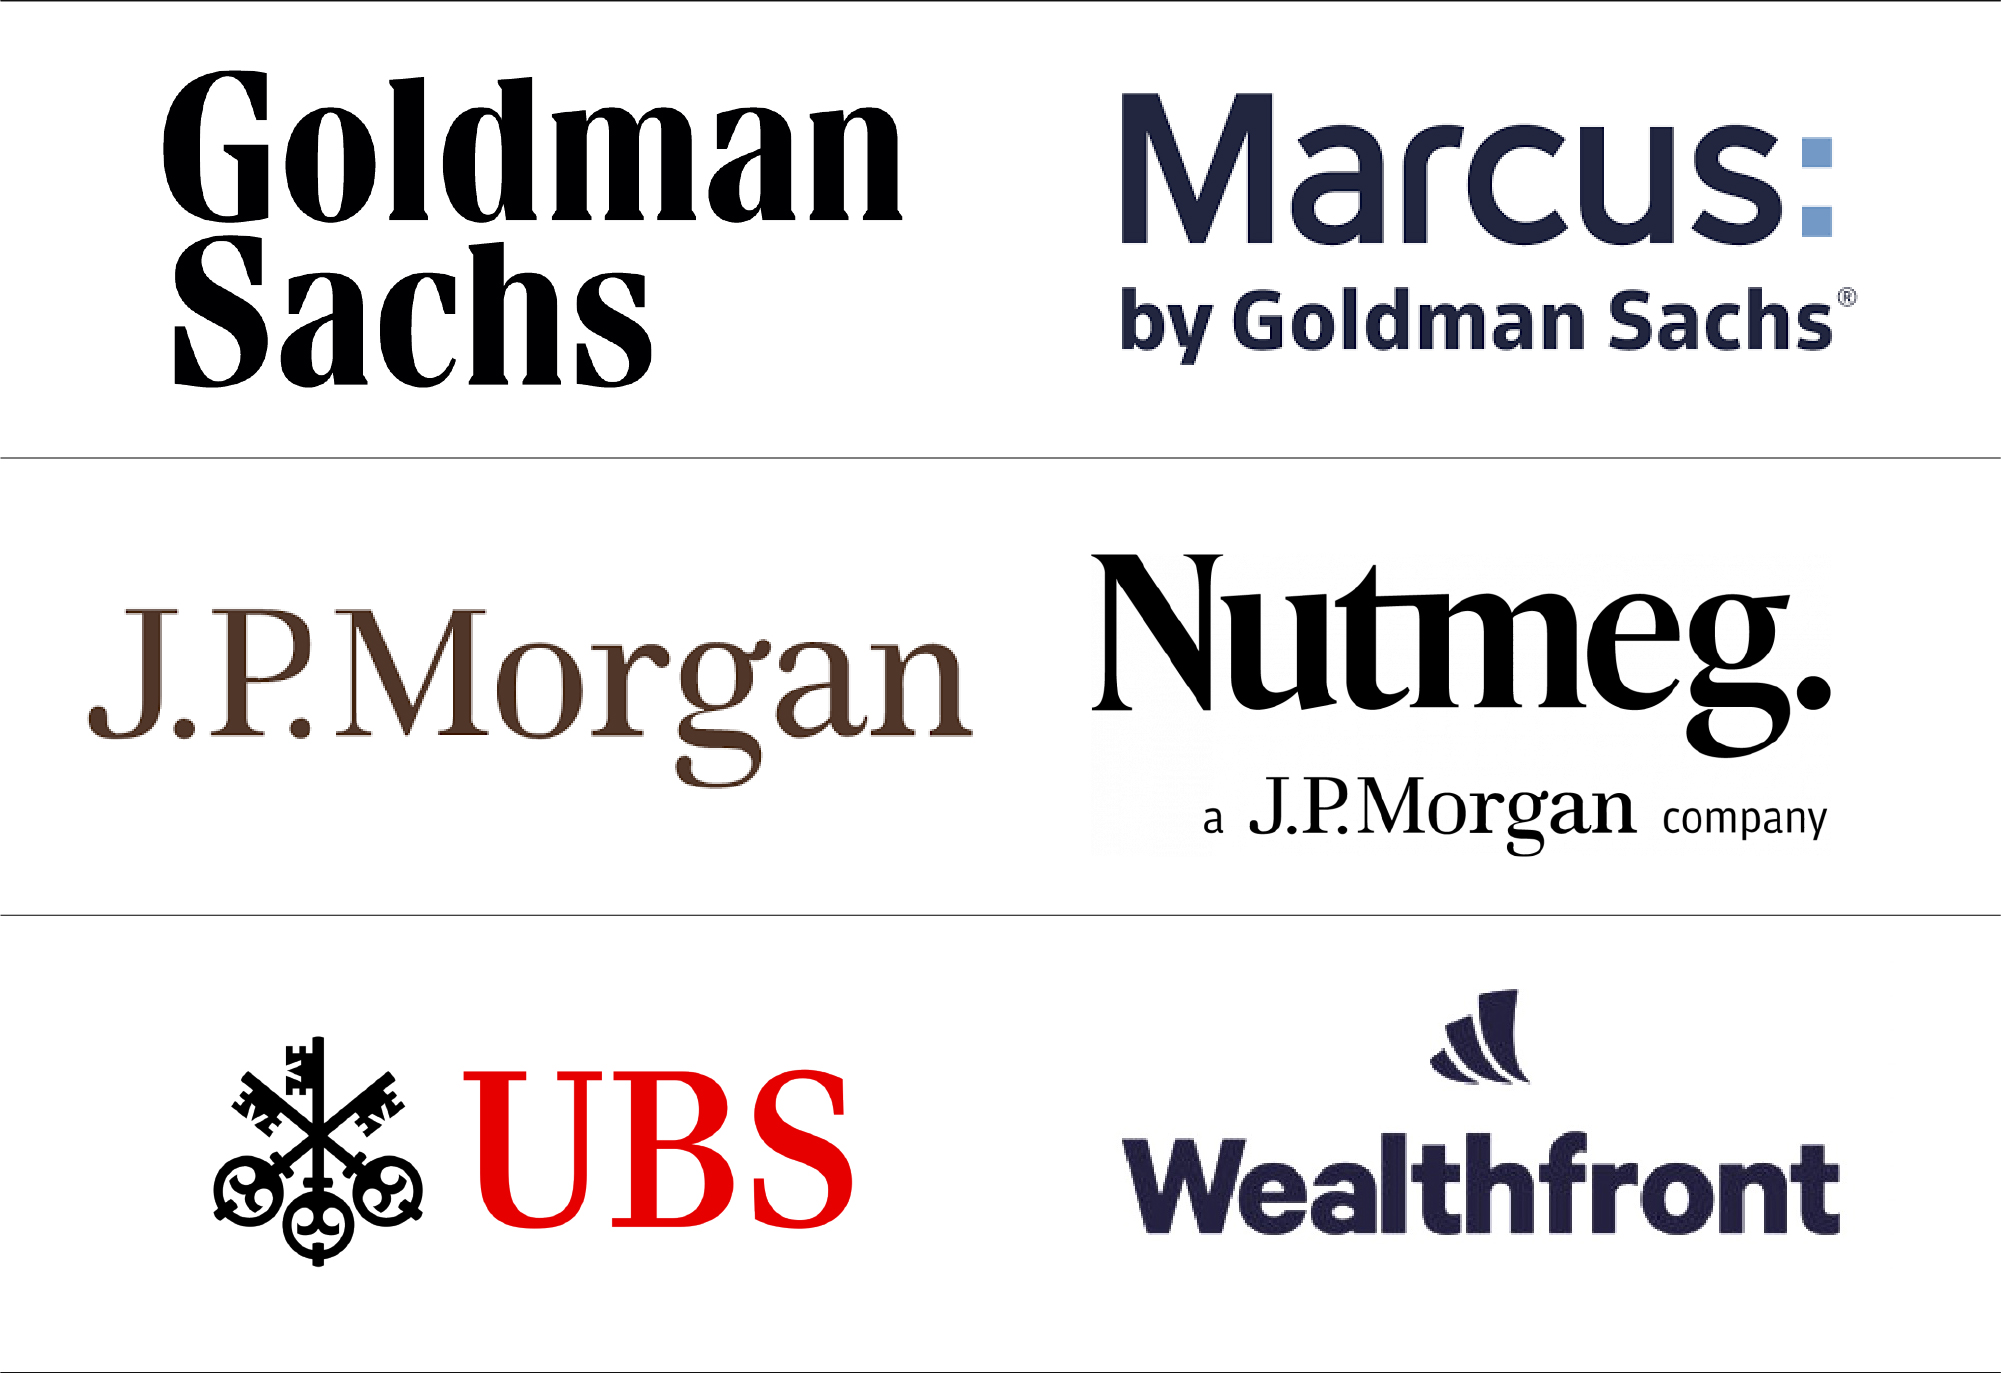 Goldman Sachs, and UBS Create New Brands to Lure Average